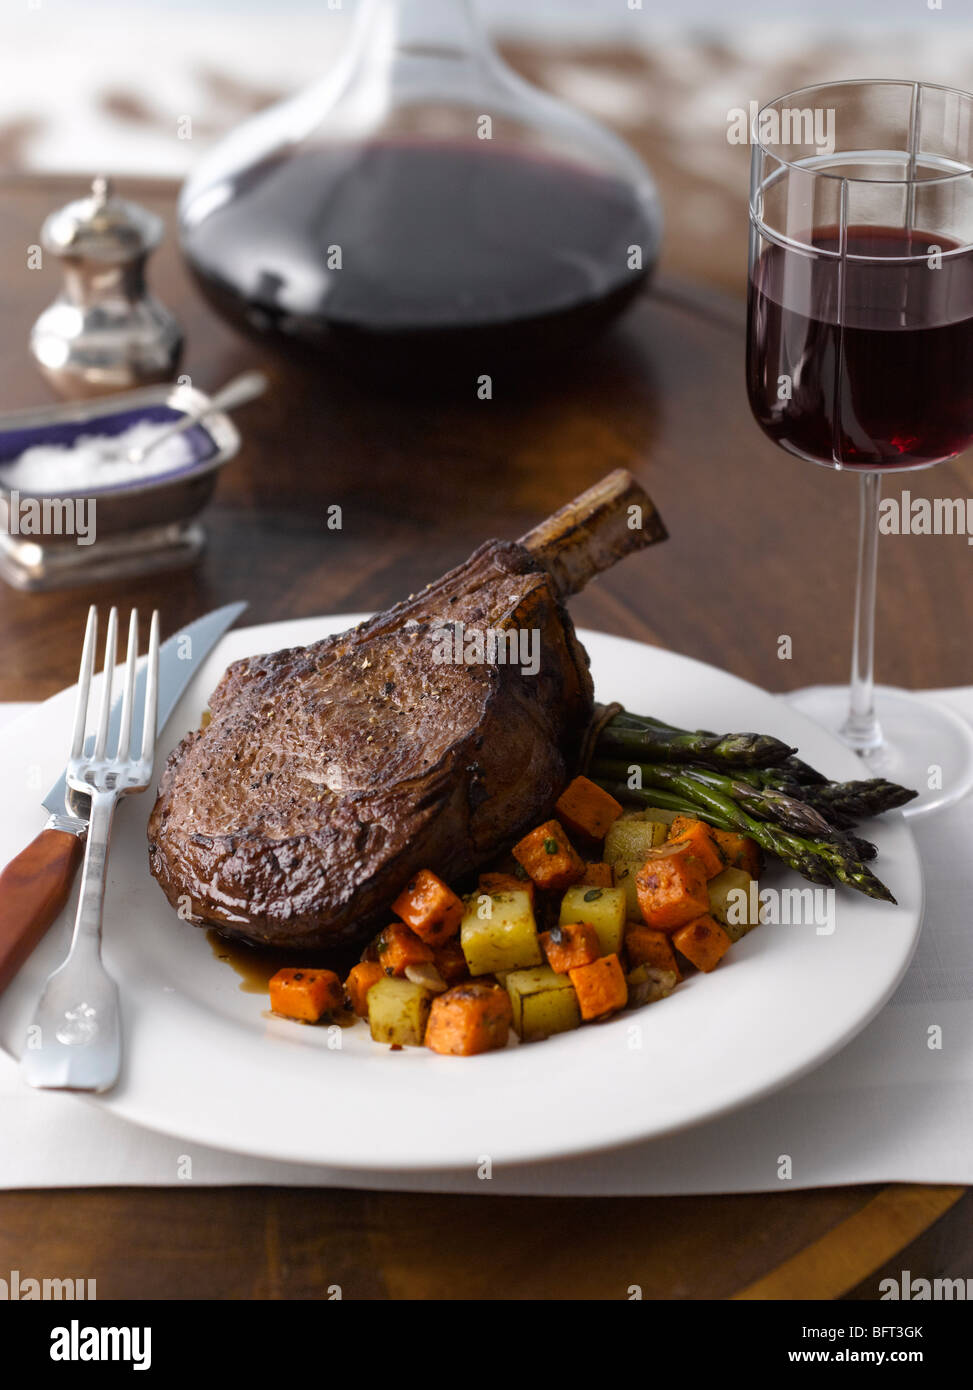 Veal Chop with Roasted Vegetables Stock Photo